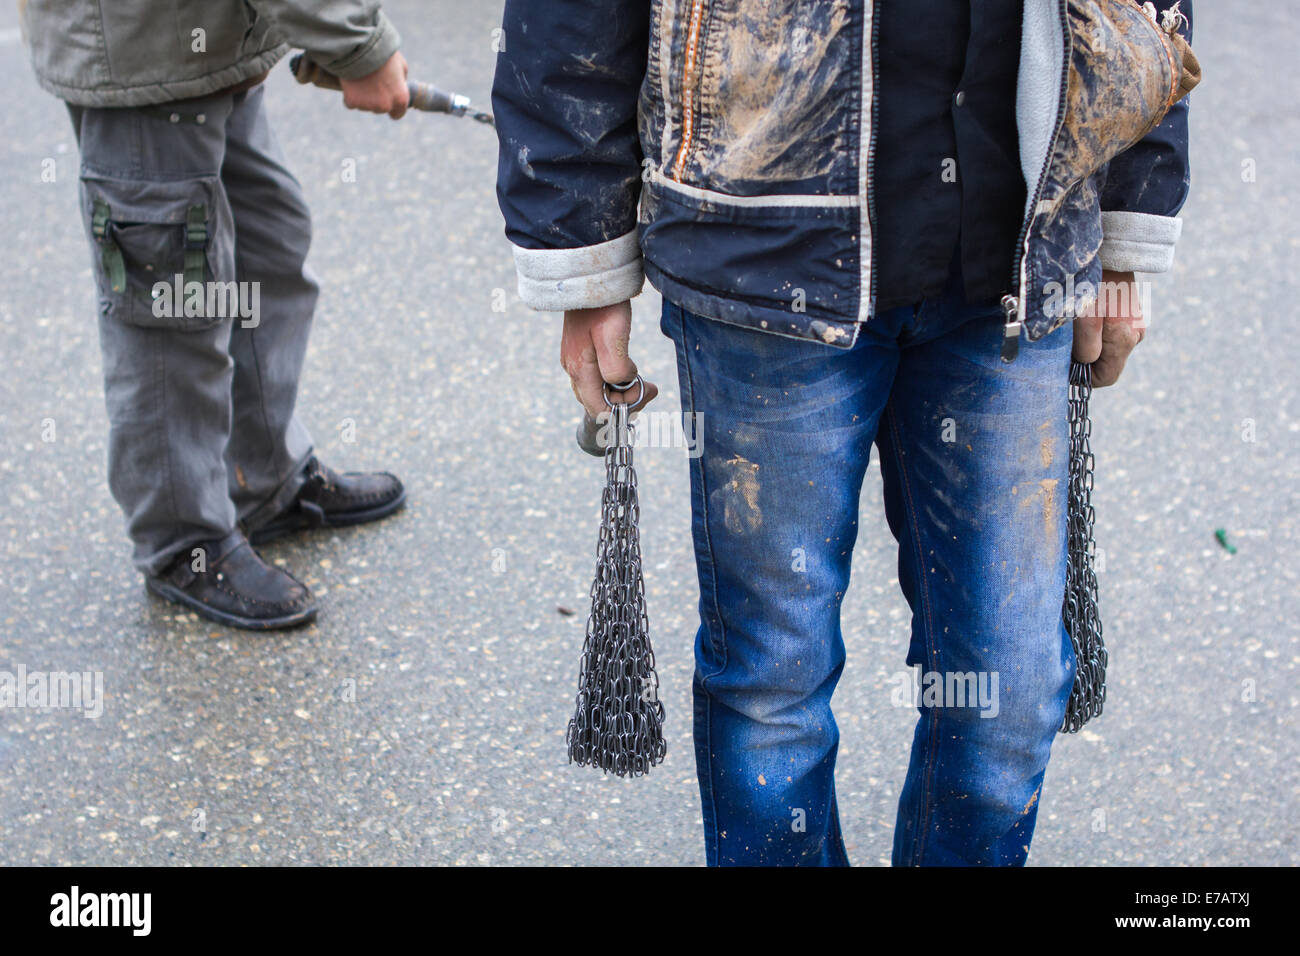 Young Shiite Muslim boys, carrying heavy iron chains used for self-flagellation, on Ashura Day, in Bijar, Iran. Stock Photo